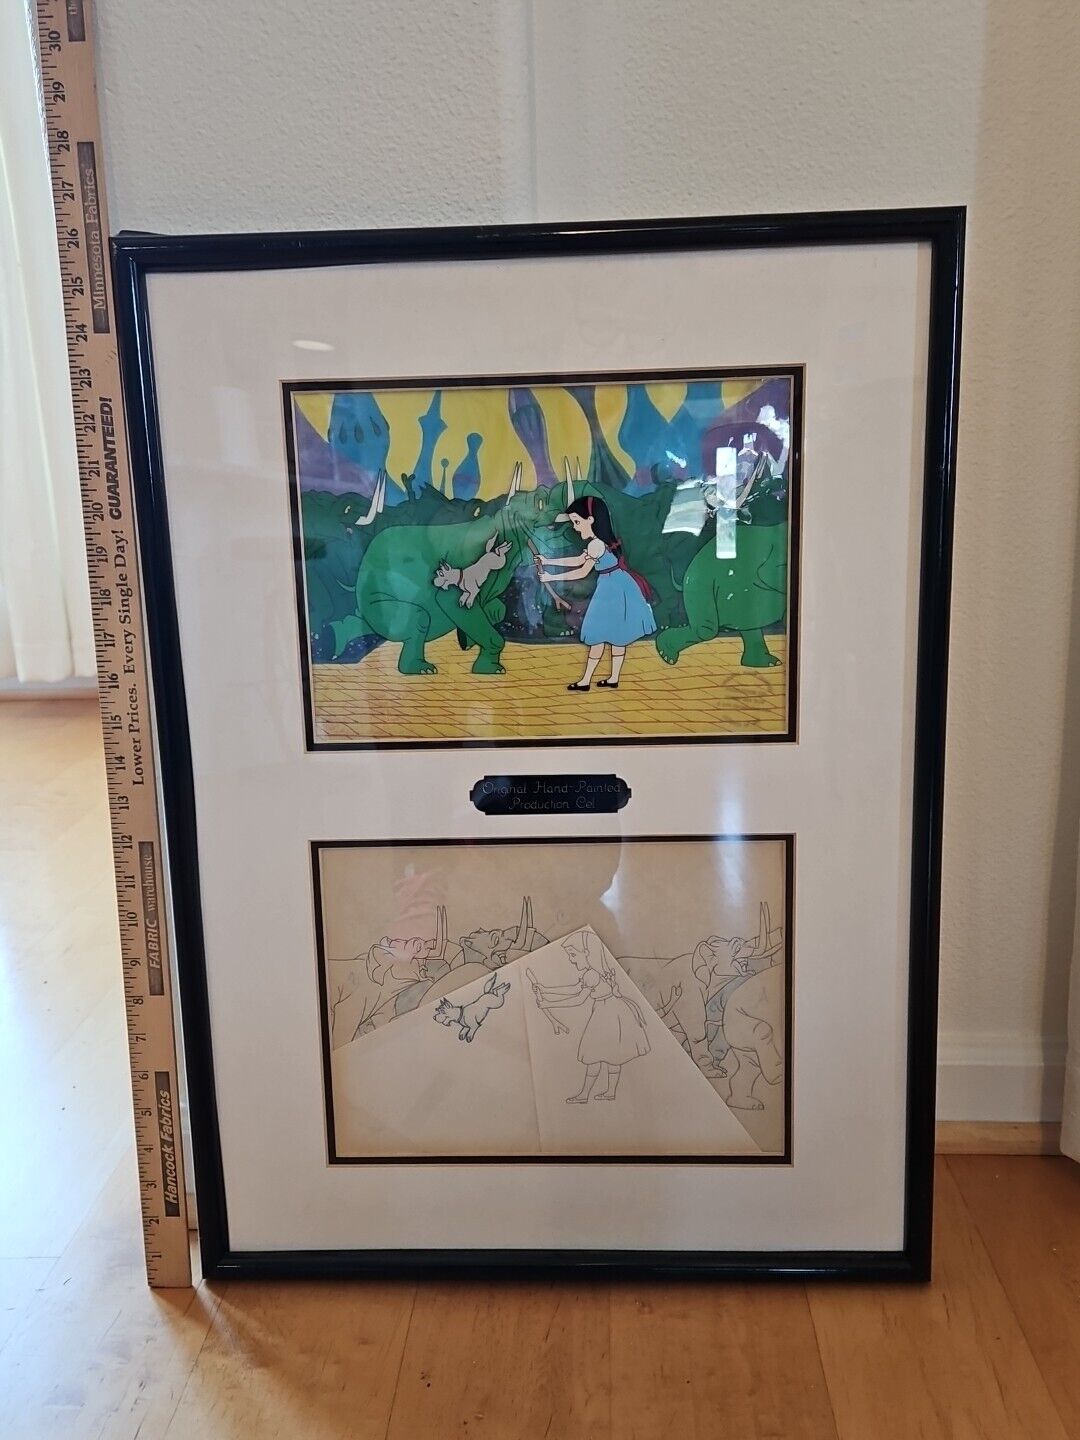 VTG 1973 Original Hand Painted Production Cel Drawing JOURNEY BACK TO OZ Cartoon